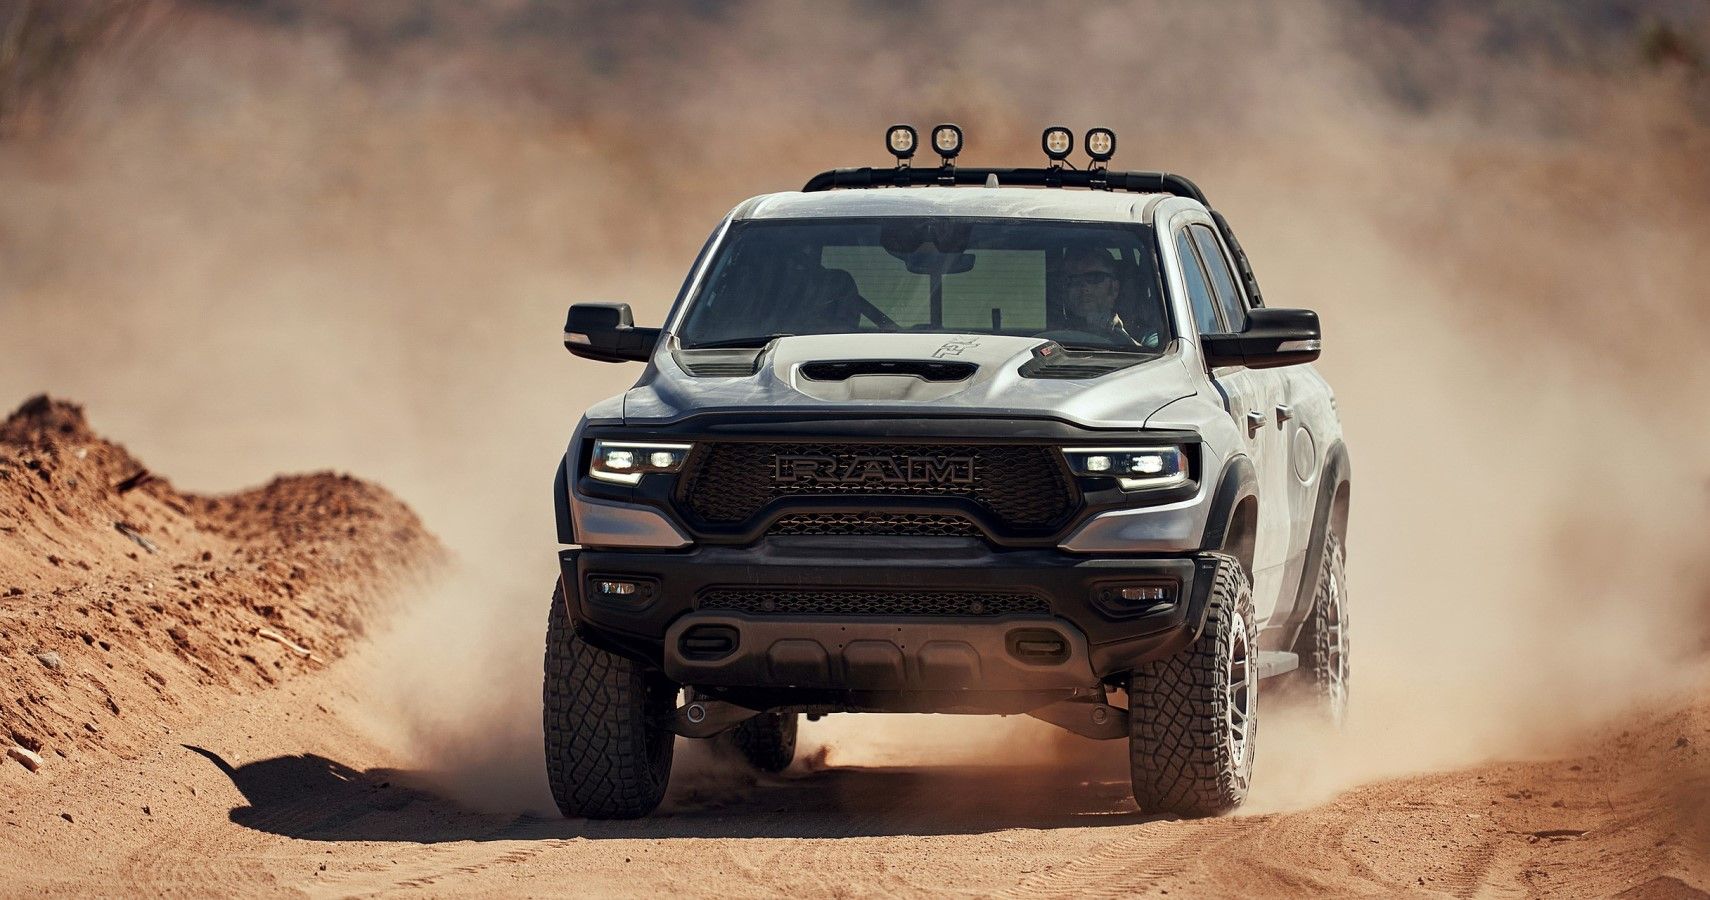 2021 RAM 1500 TRX is what the Ford F-150 Raptor must fear